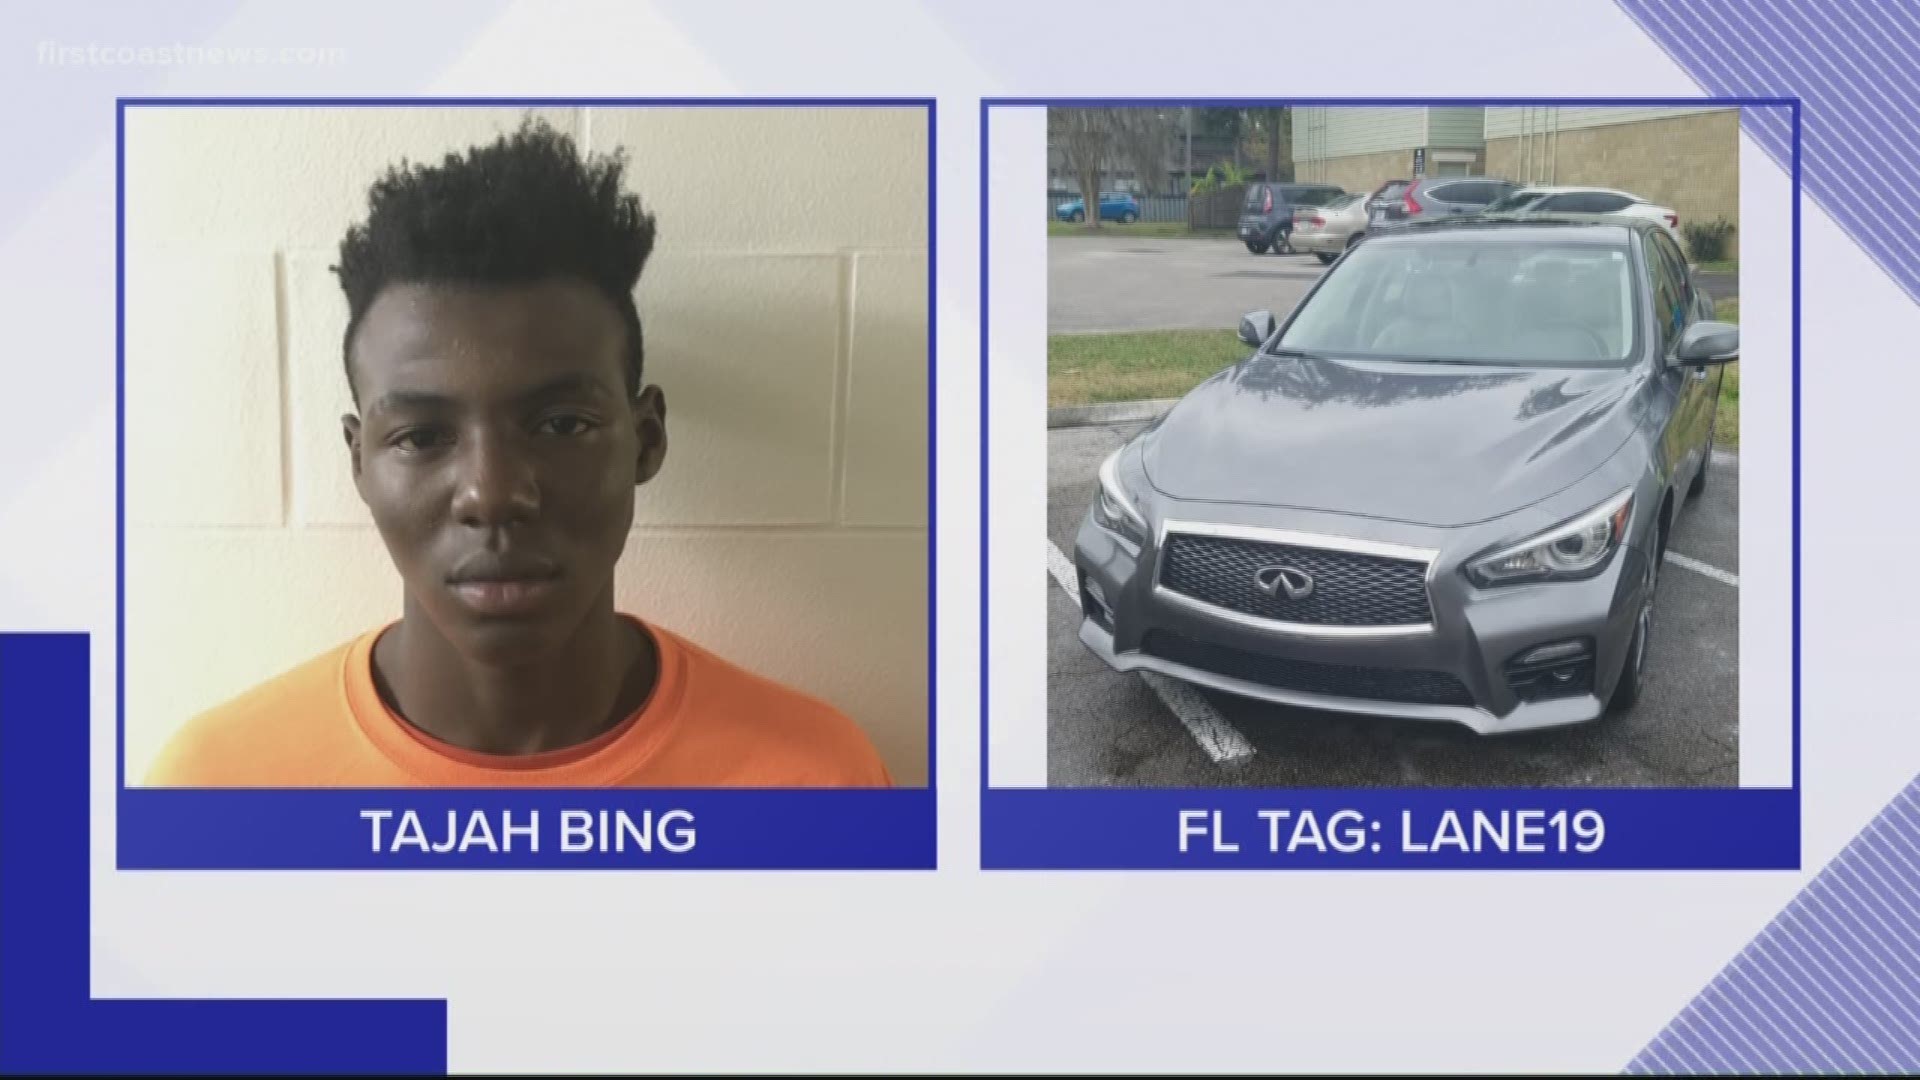 The inmate is believed to be traveling in a bronze, four-door Infiniti Q50 with the Florida tag, LANE19.